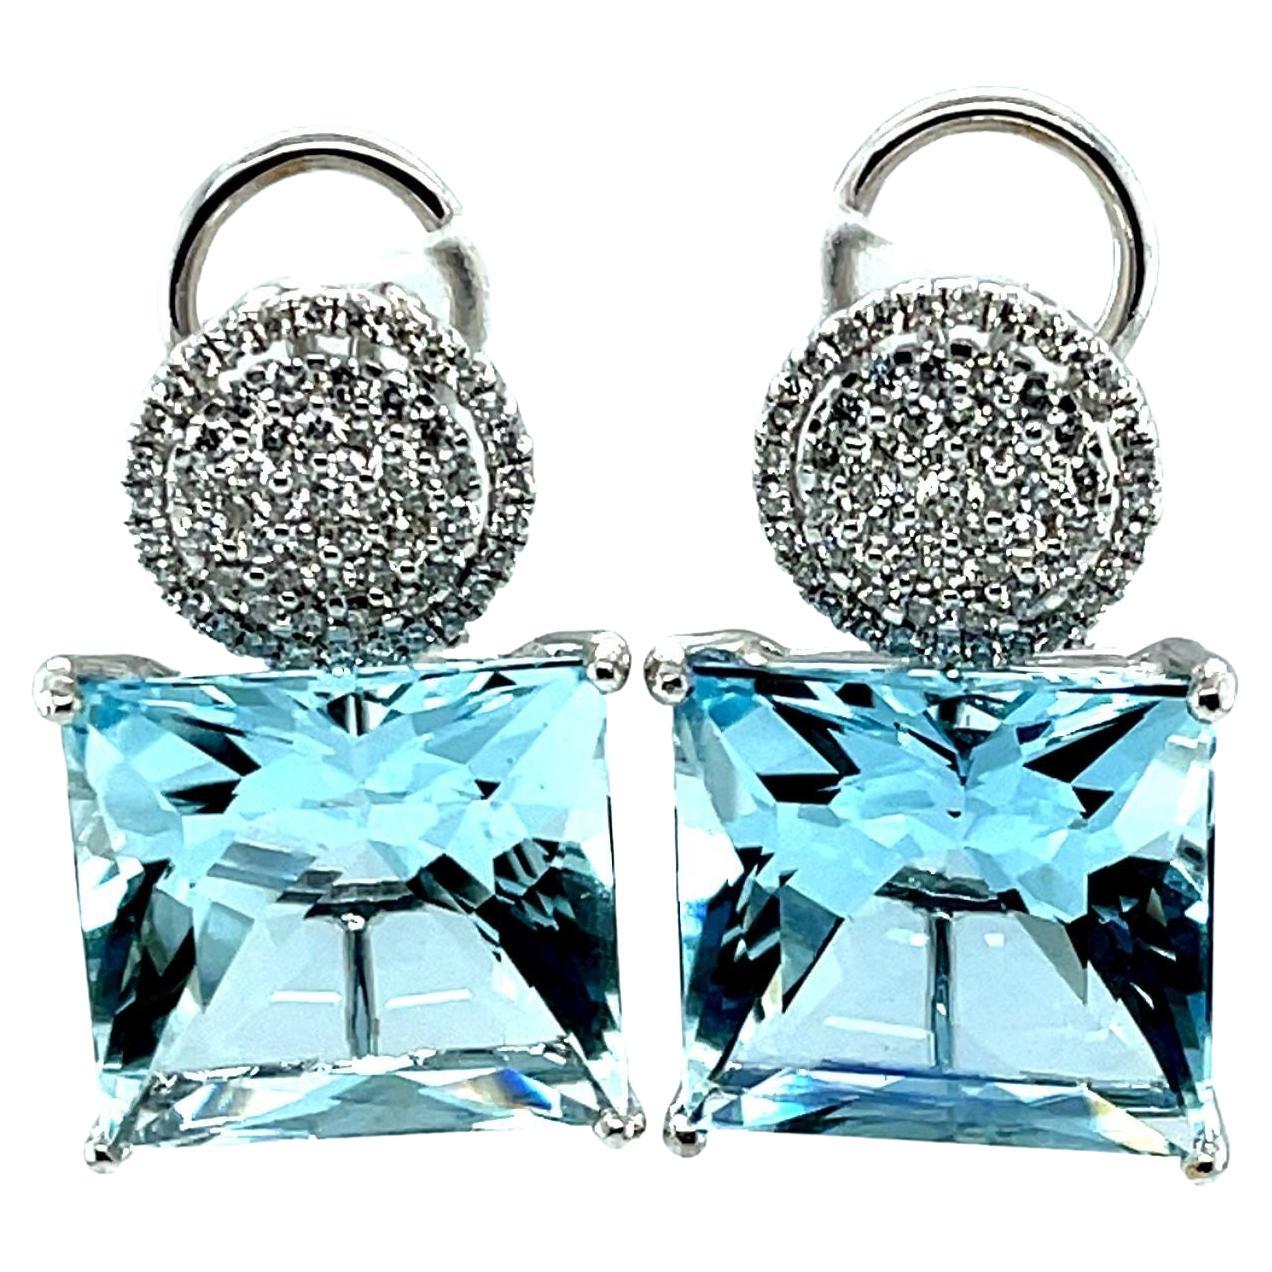 These bold earrings feature two spectacular square-cut aquamarines that weigh a total of 26 carats. The aquamarines have a deep blue color and are very large, measuring 15mm across. It is highly unusual to find a beautifully matched pair of